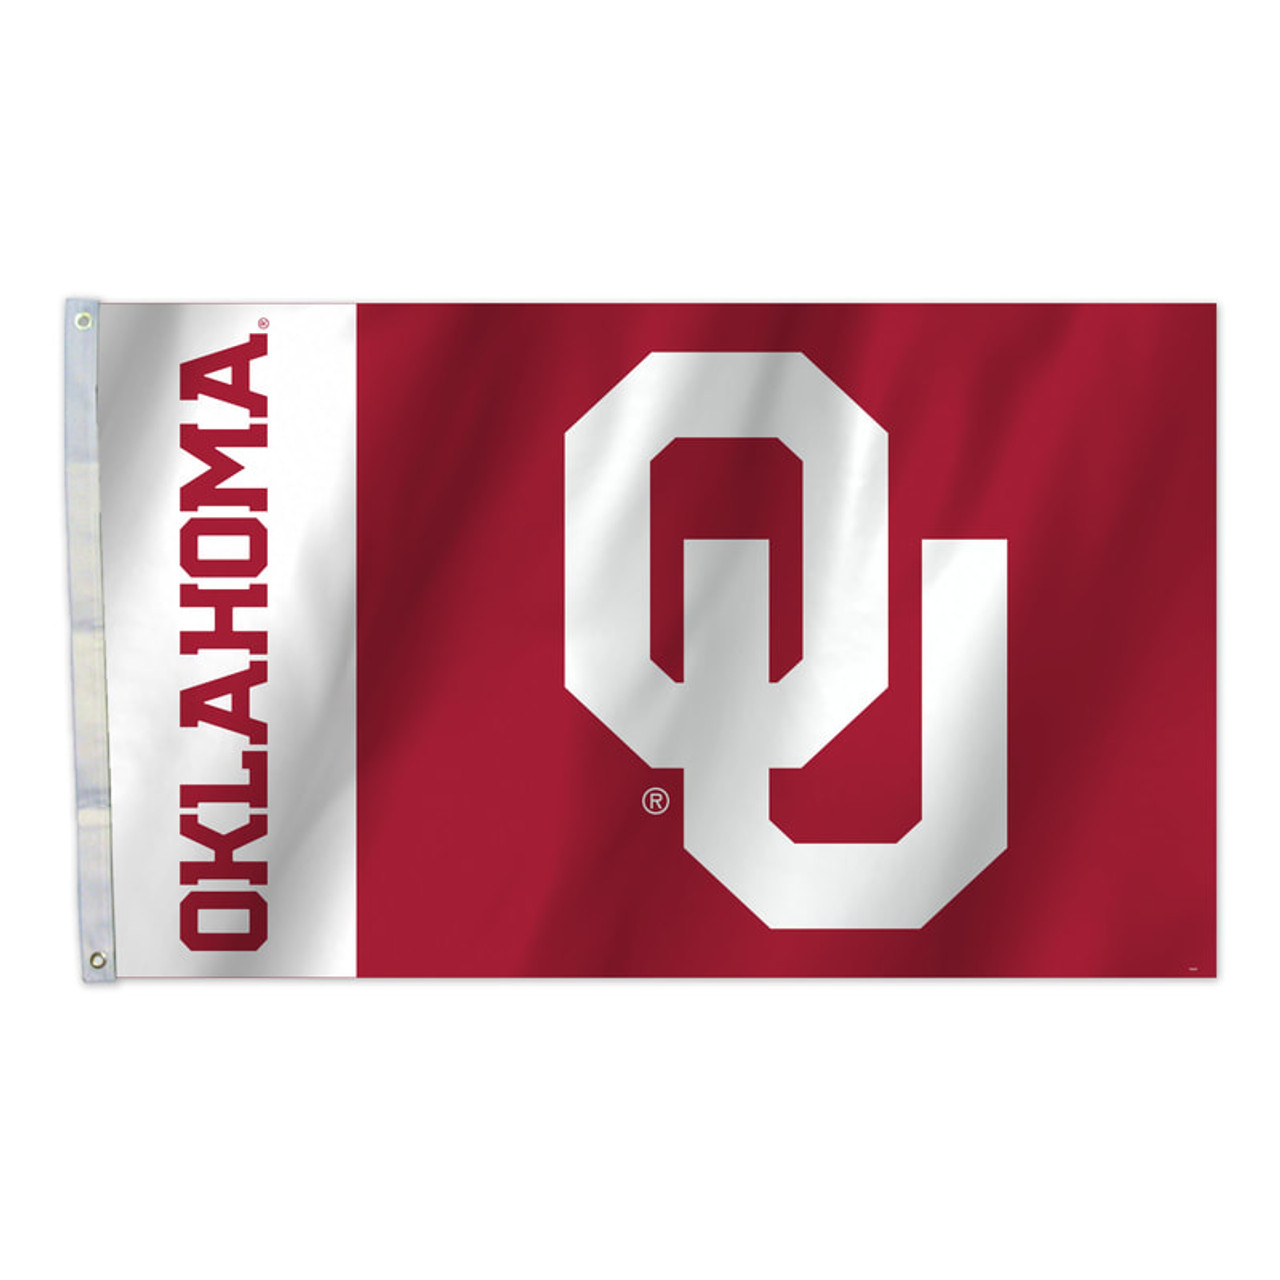 Oklahoma Sooners Flag 3x5 Banner CO - image 1 of 7